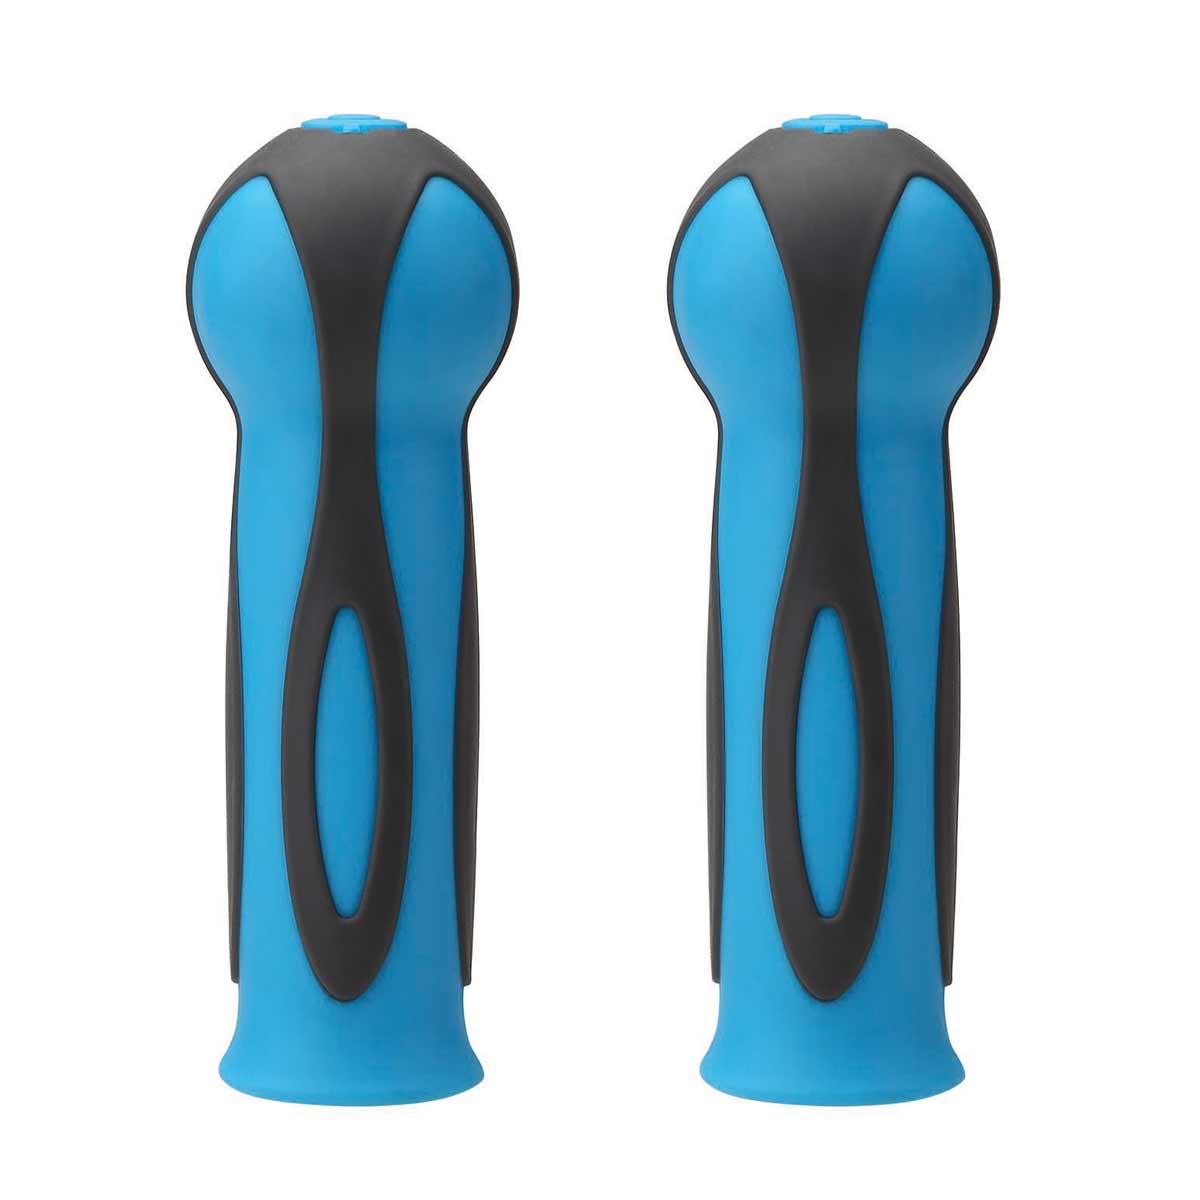 Spare parts: Scooter Handlebar Grips sky blue - MoonyBoon